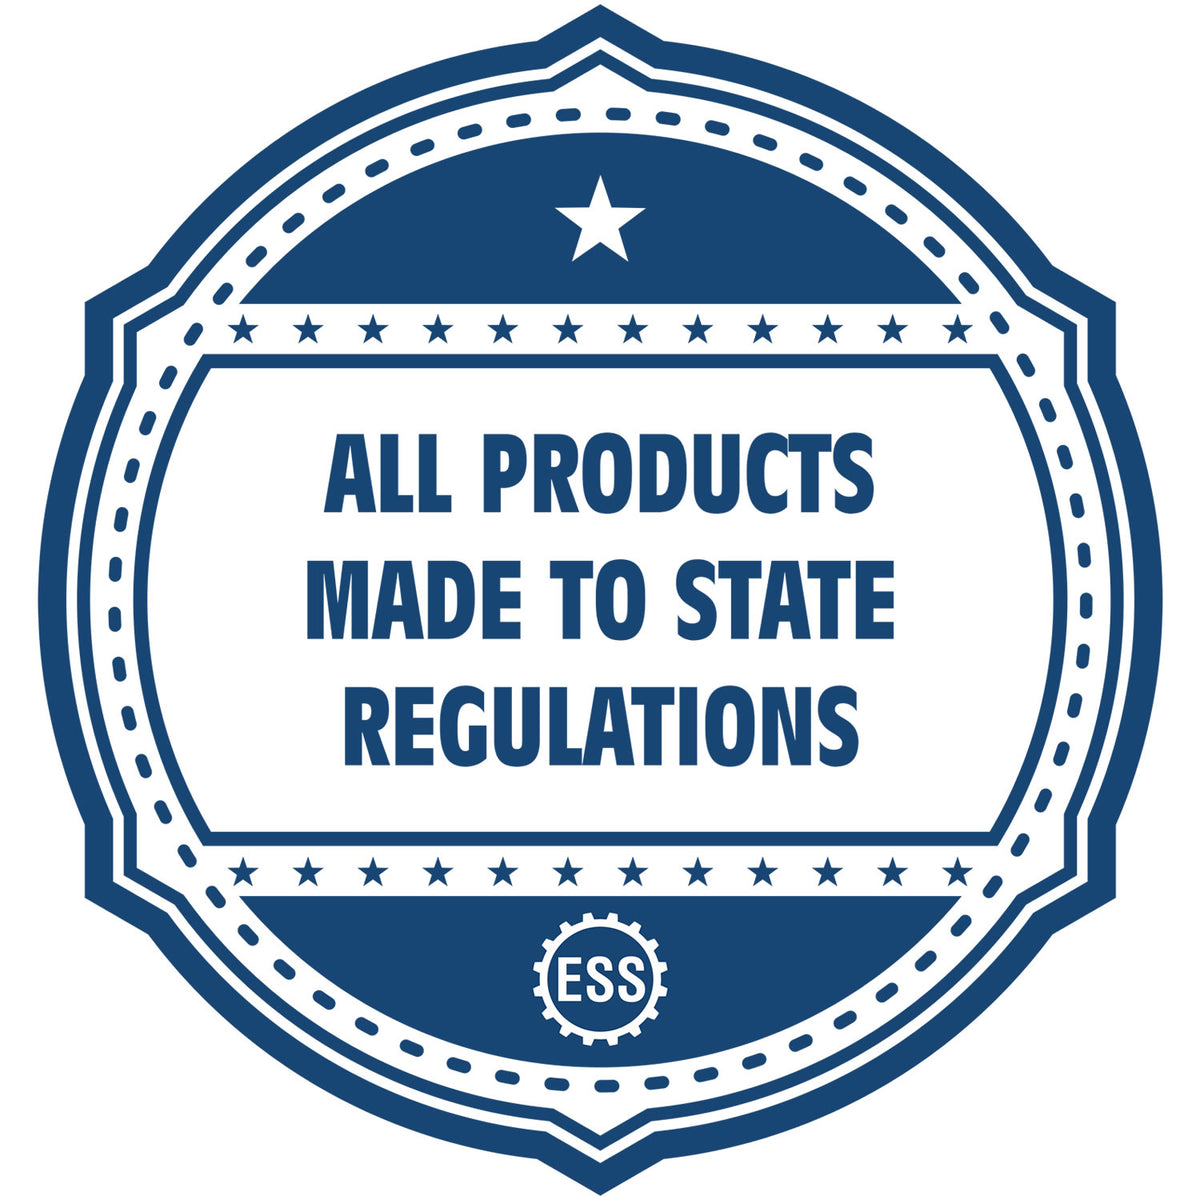 A blue icon or badge for the Maine Professional Geologist Seal Stamp showing that this product is made in compliance with state regulations.